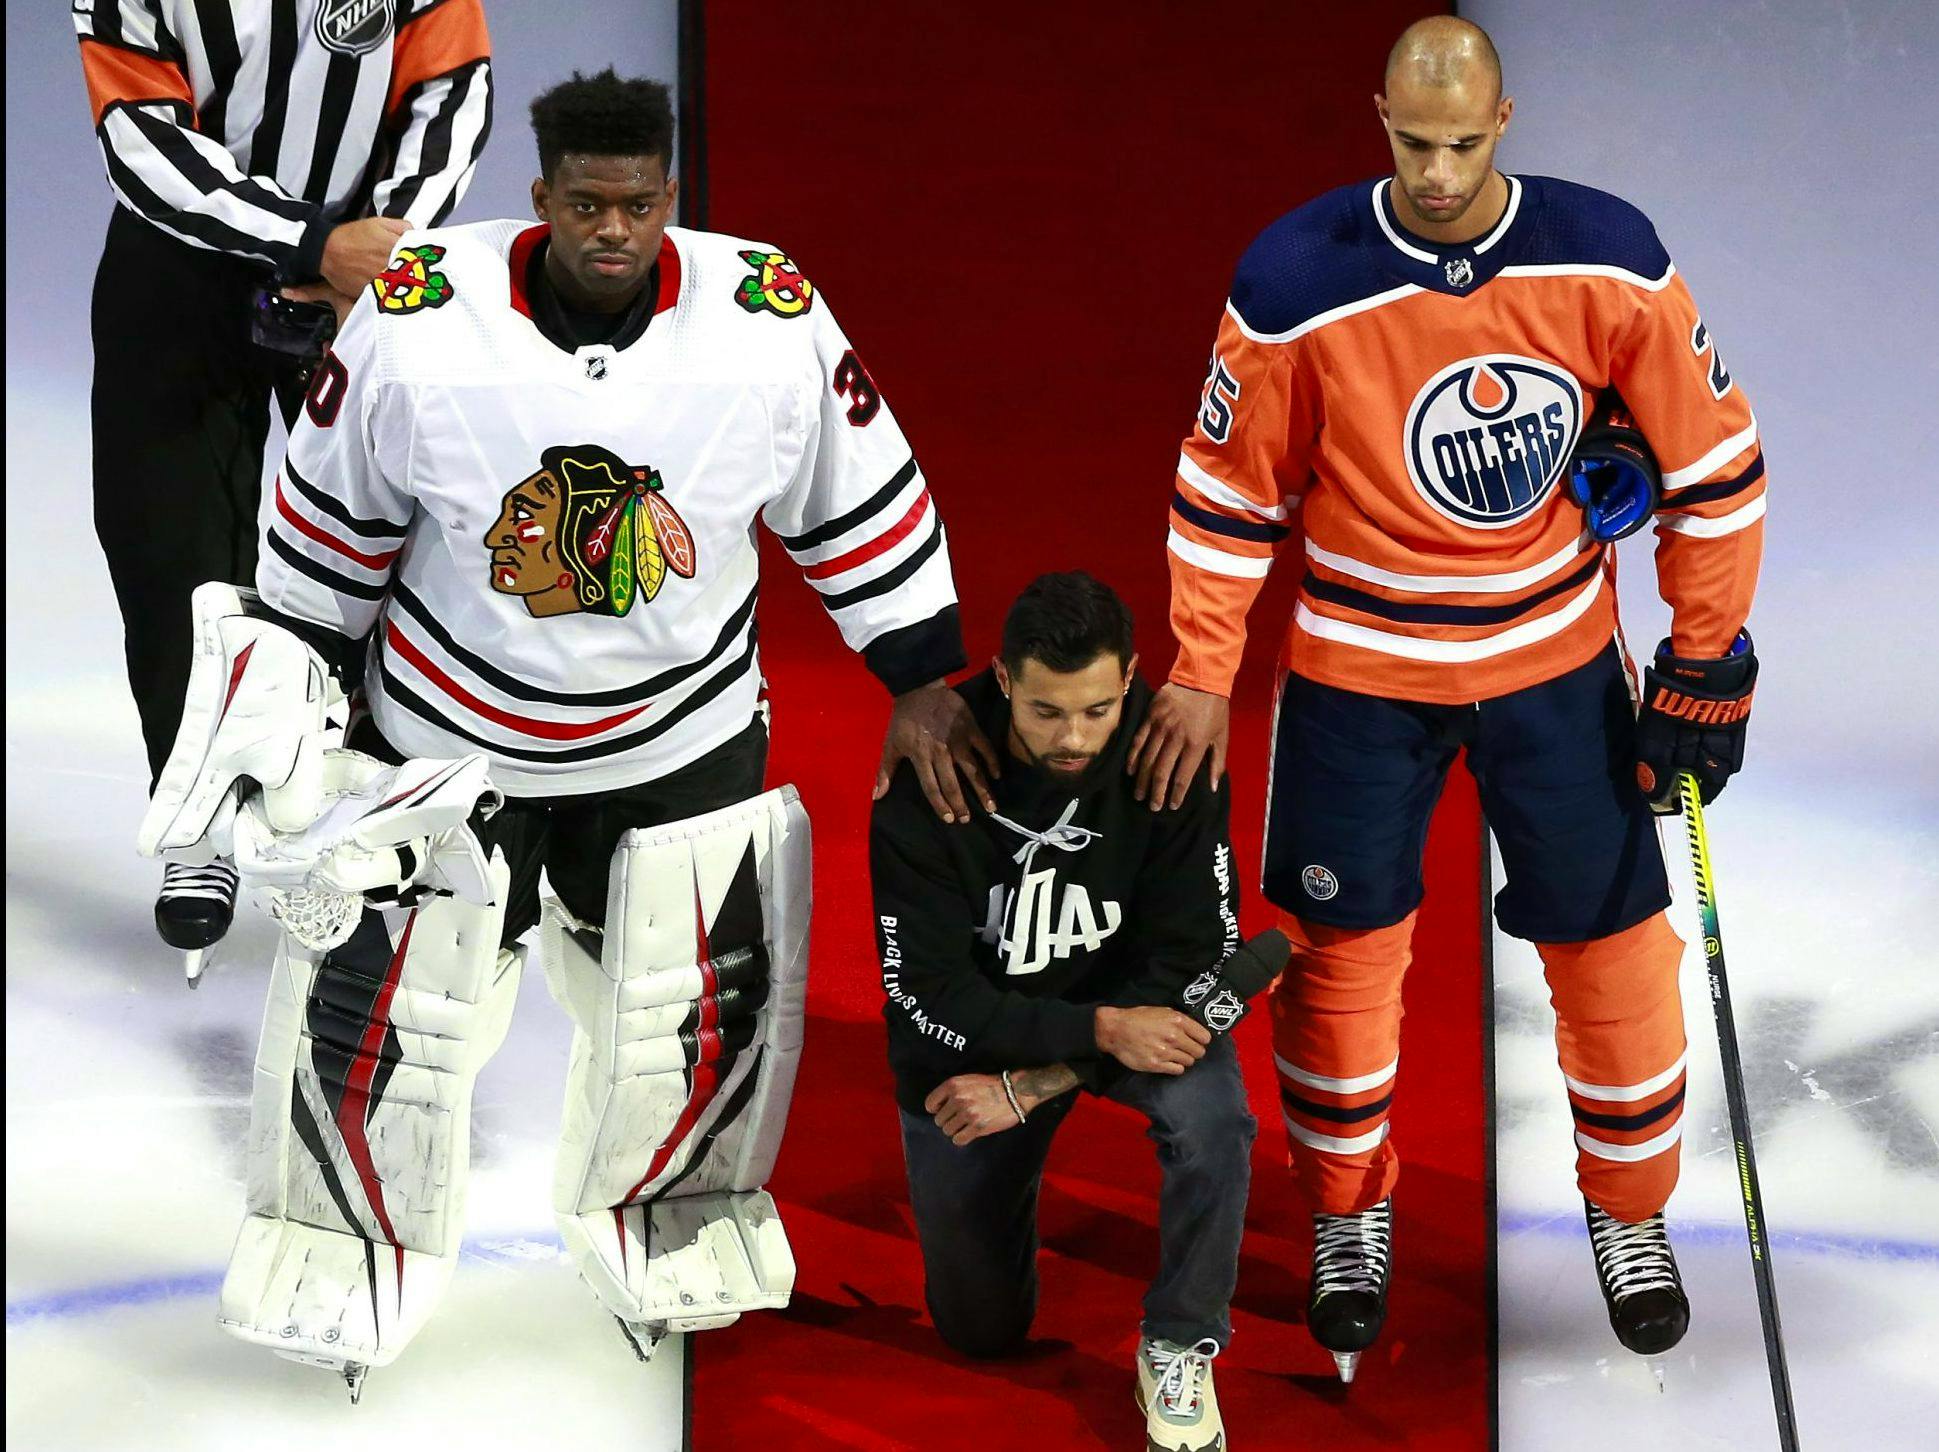 Matt Dumba of the wild is flanked by Blackhawks goalie Malcolm Subban and Oilers’ Darnell Nurse during the U.S. anthem prior to a playoff game at Edmonton in August.                 